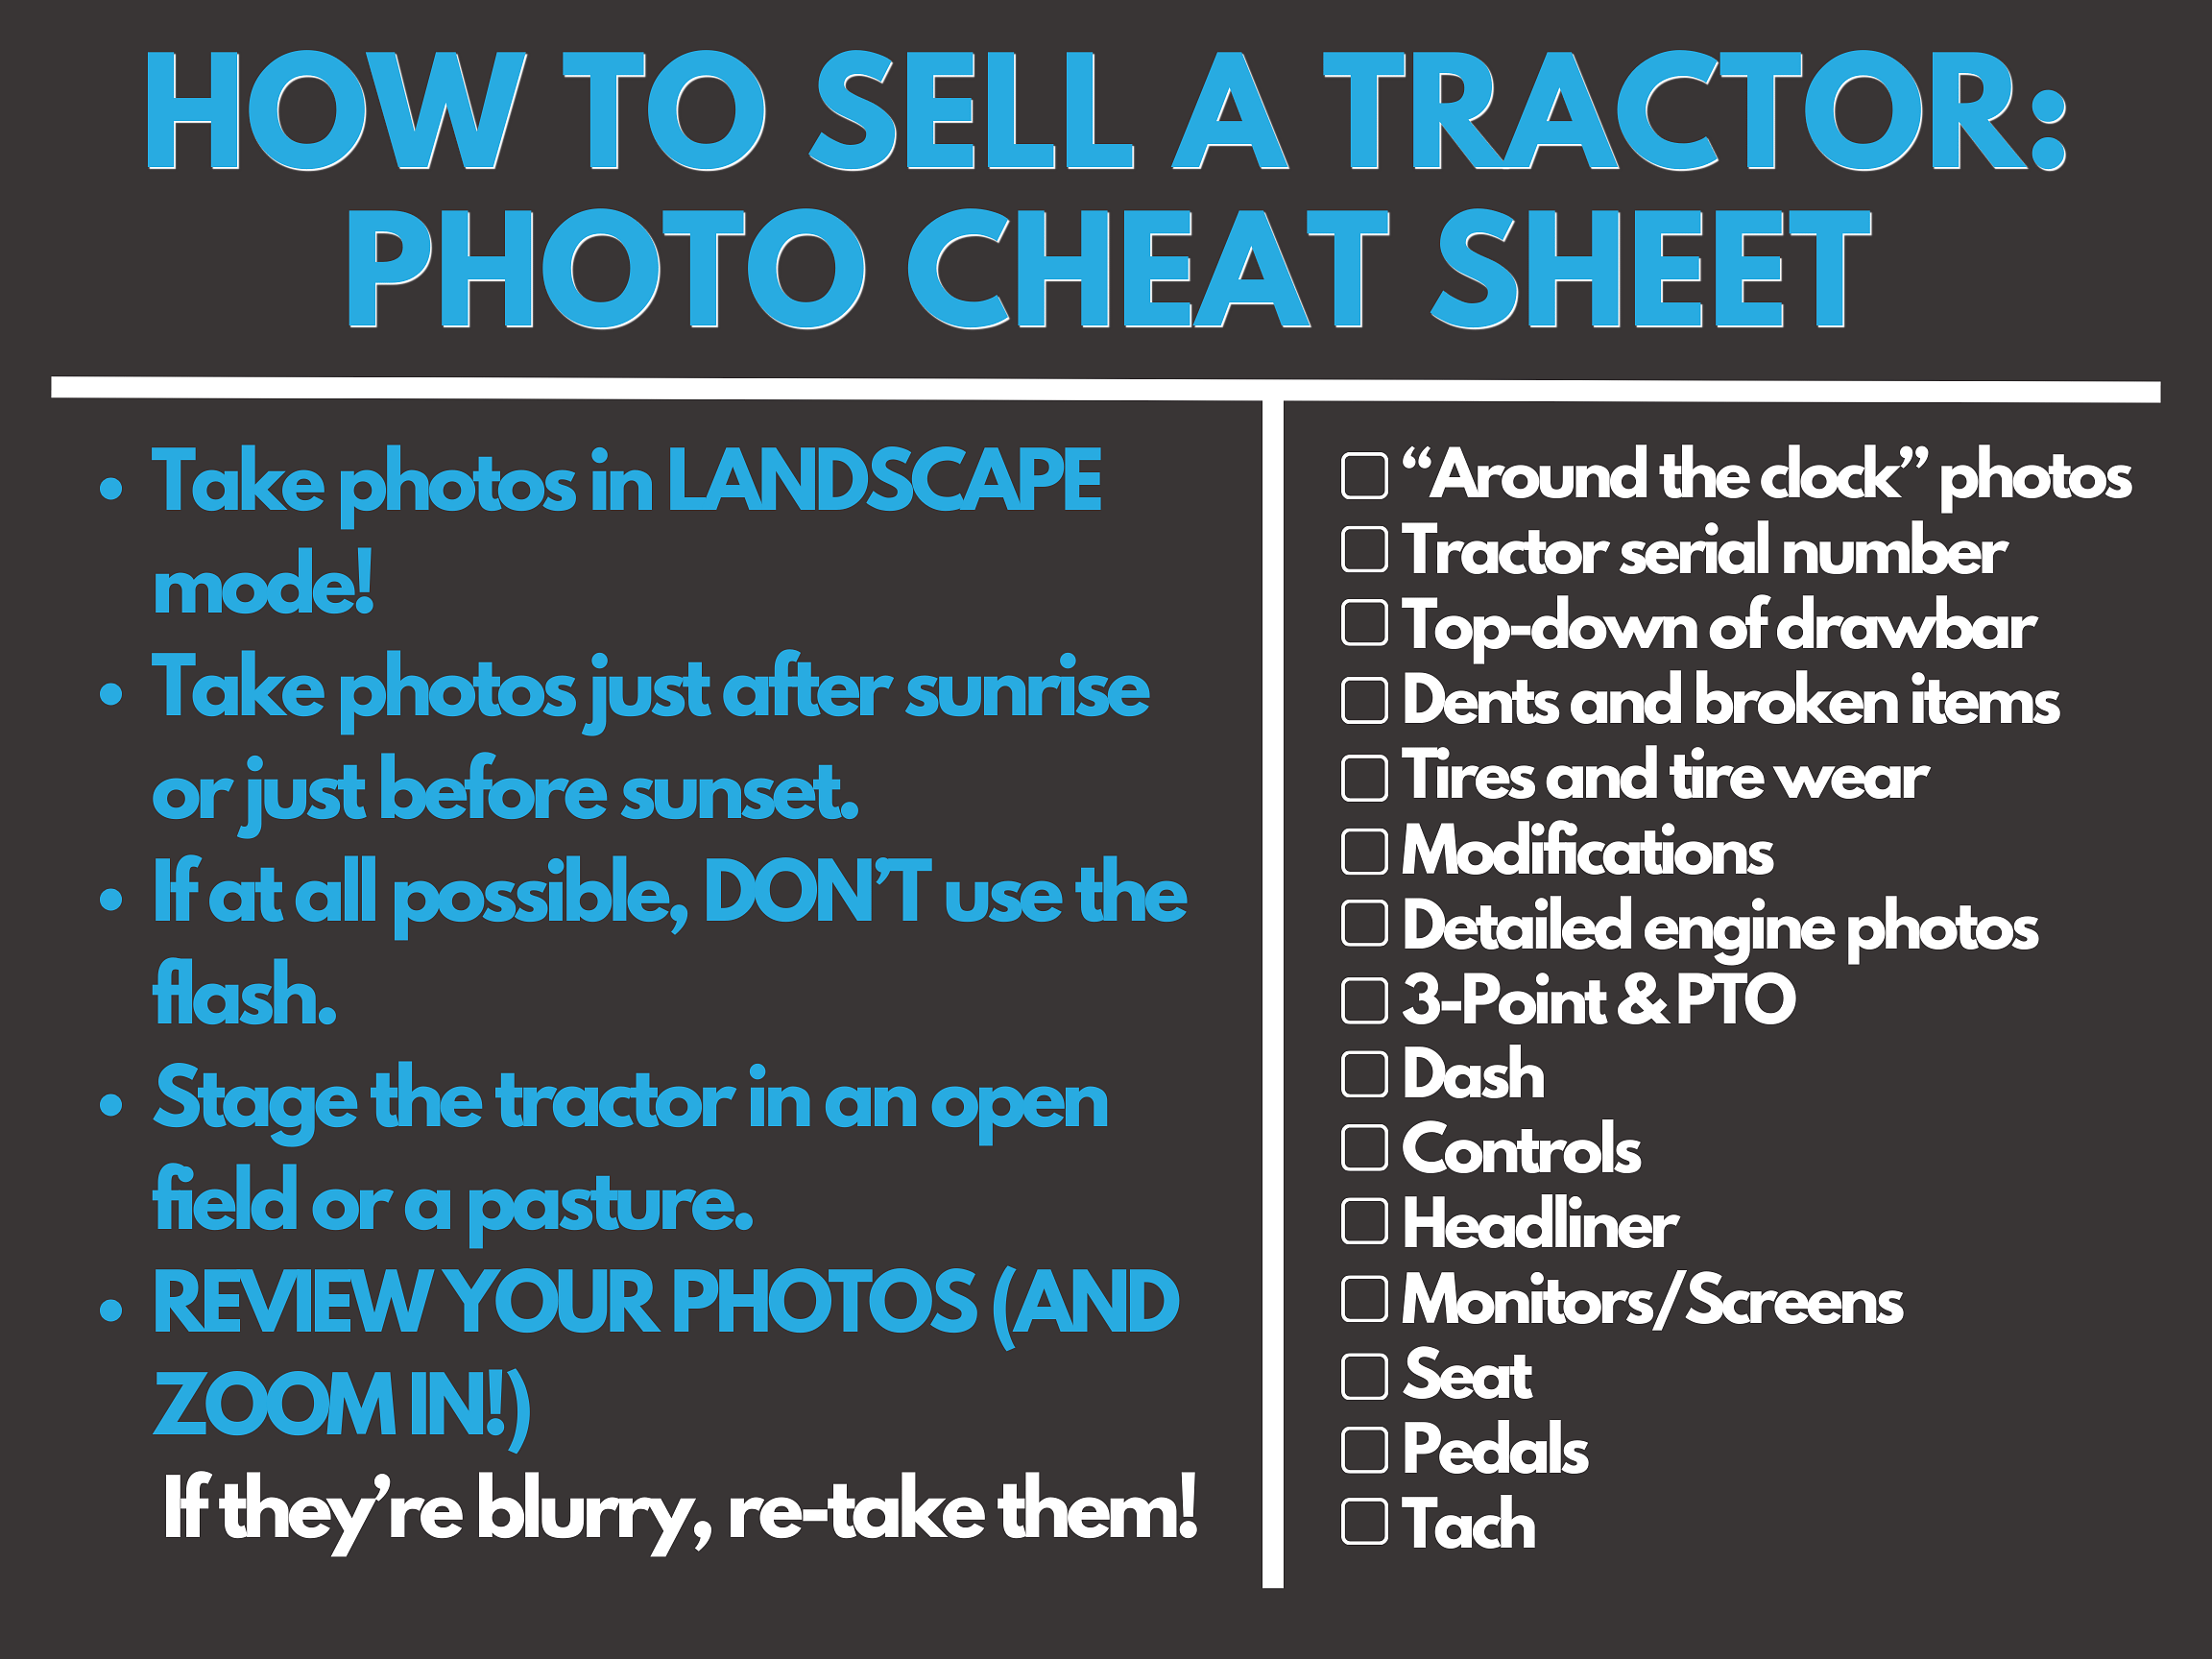 How To Sell A Tractor Online Photo Cheat Sheet